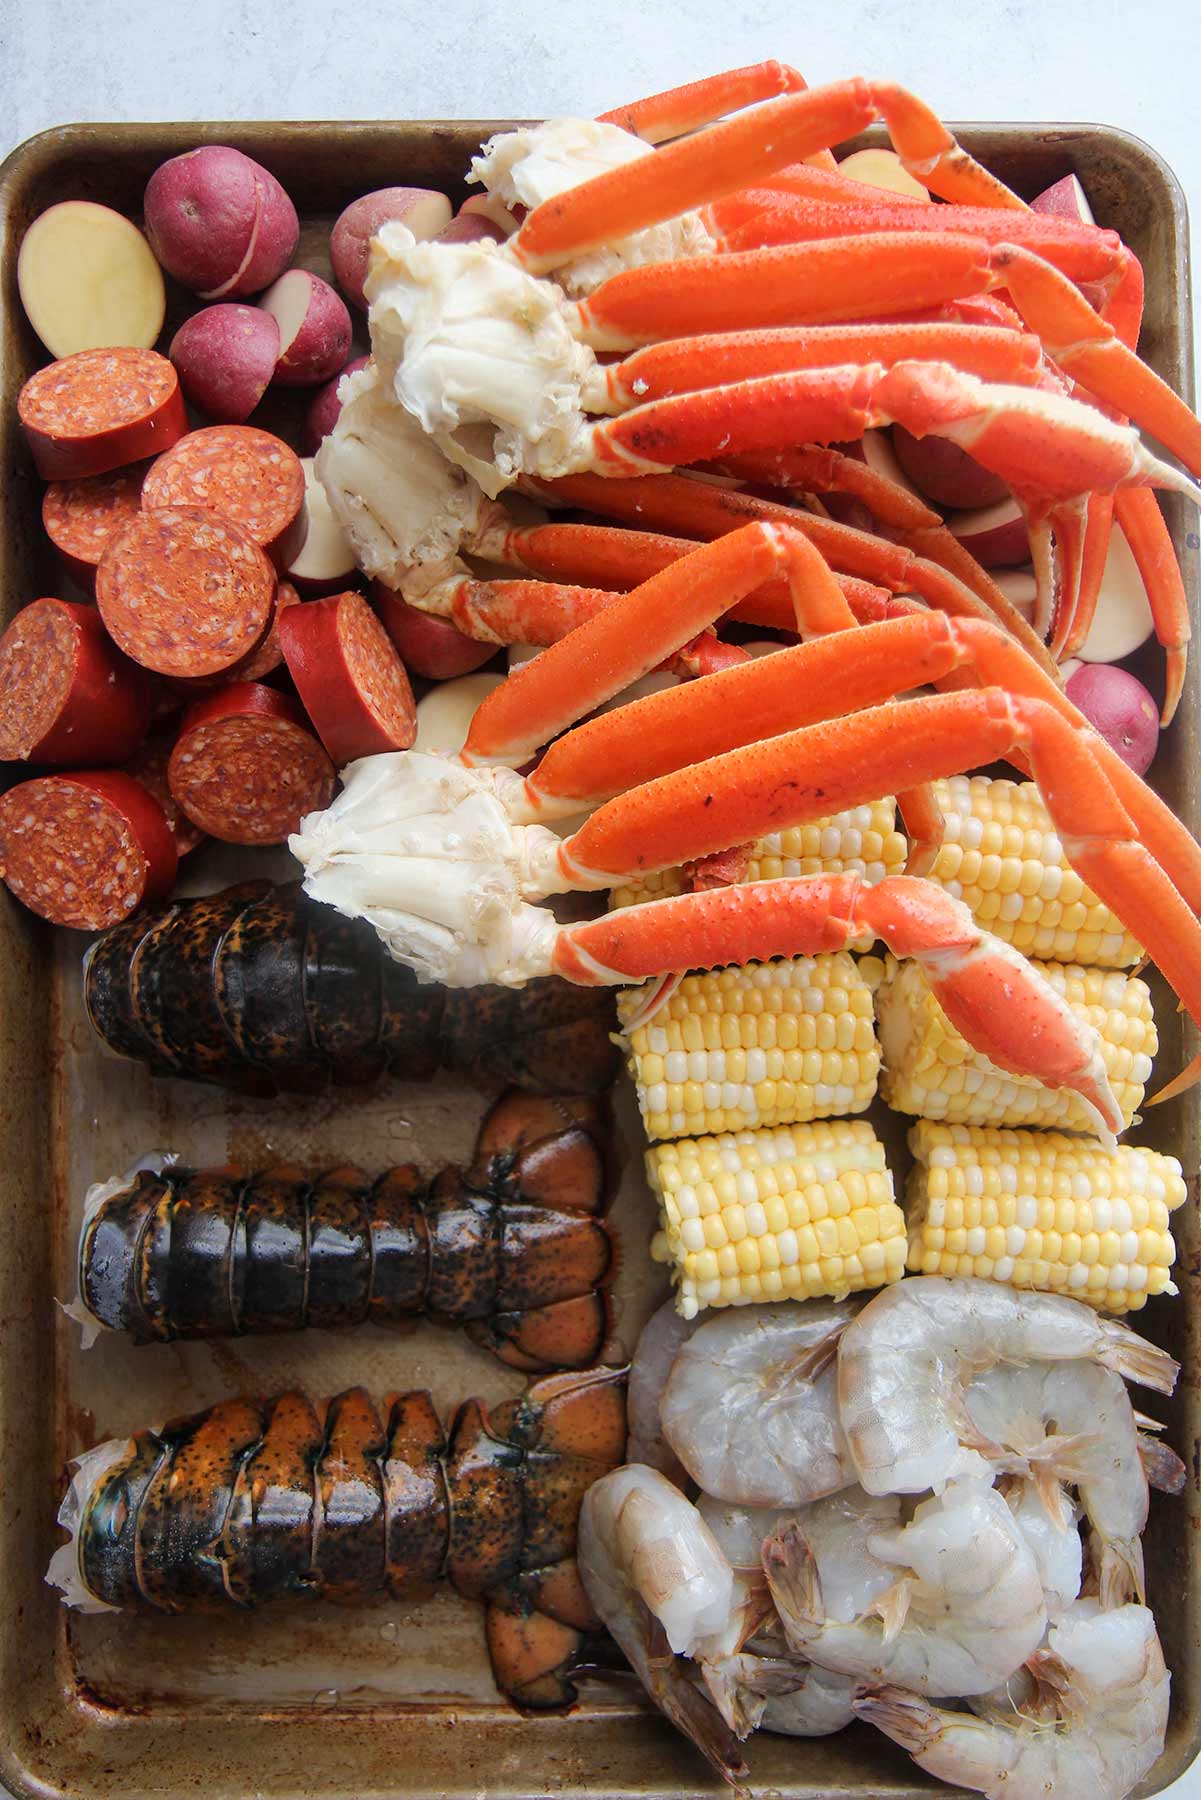 ingredients for seafood boil. Raw shellfish, corn, potatoes, and sausage.